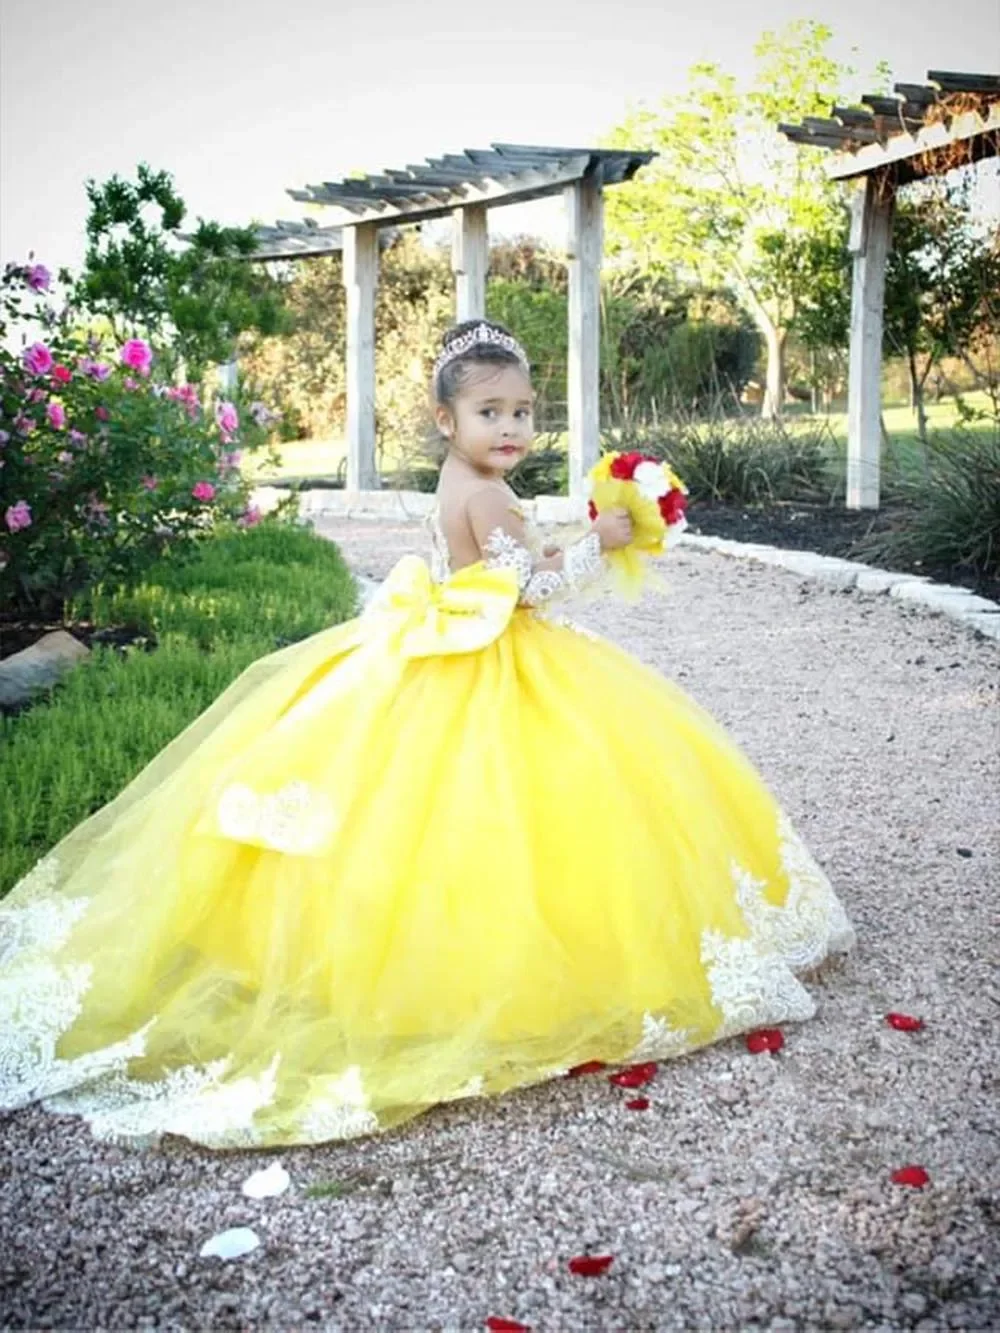 

Ball Gown Flower Girl Dresses for Wedding Toddlers Beaded Lace Princess Pageant Gown Full Sleeves Communion Birthday Party Dress